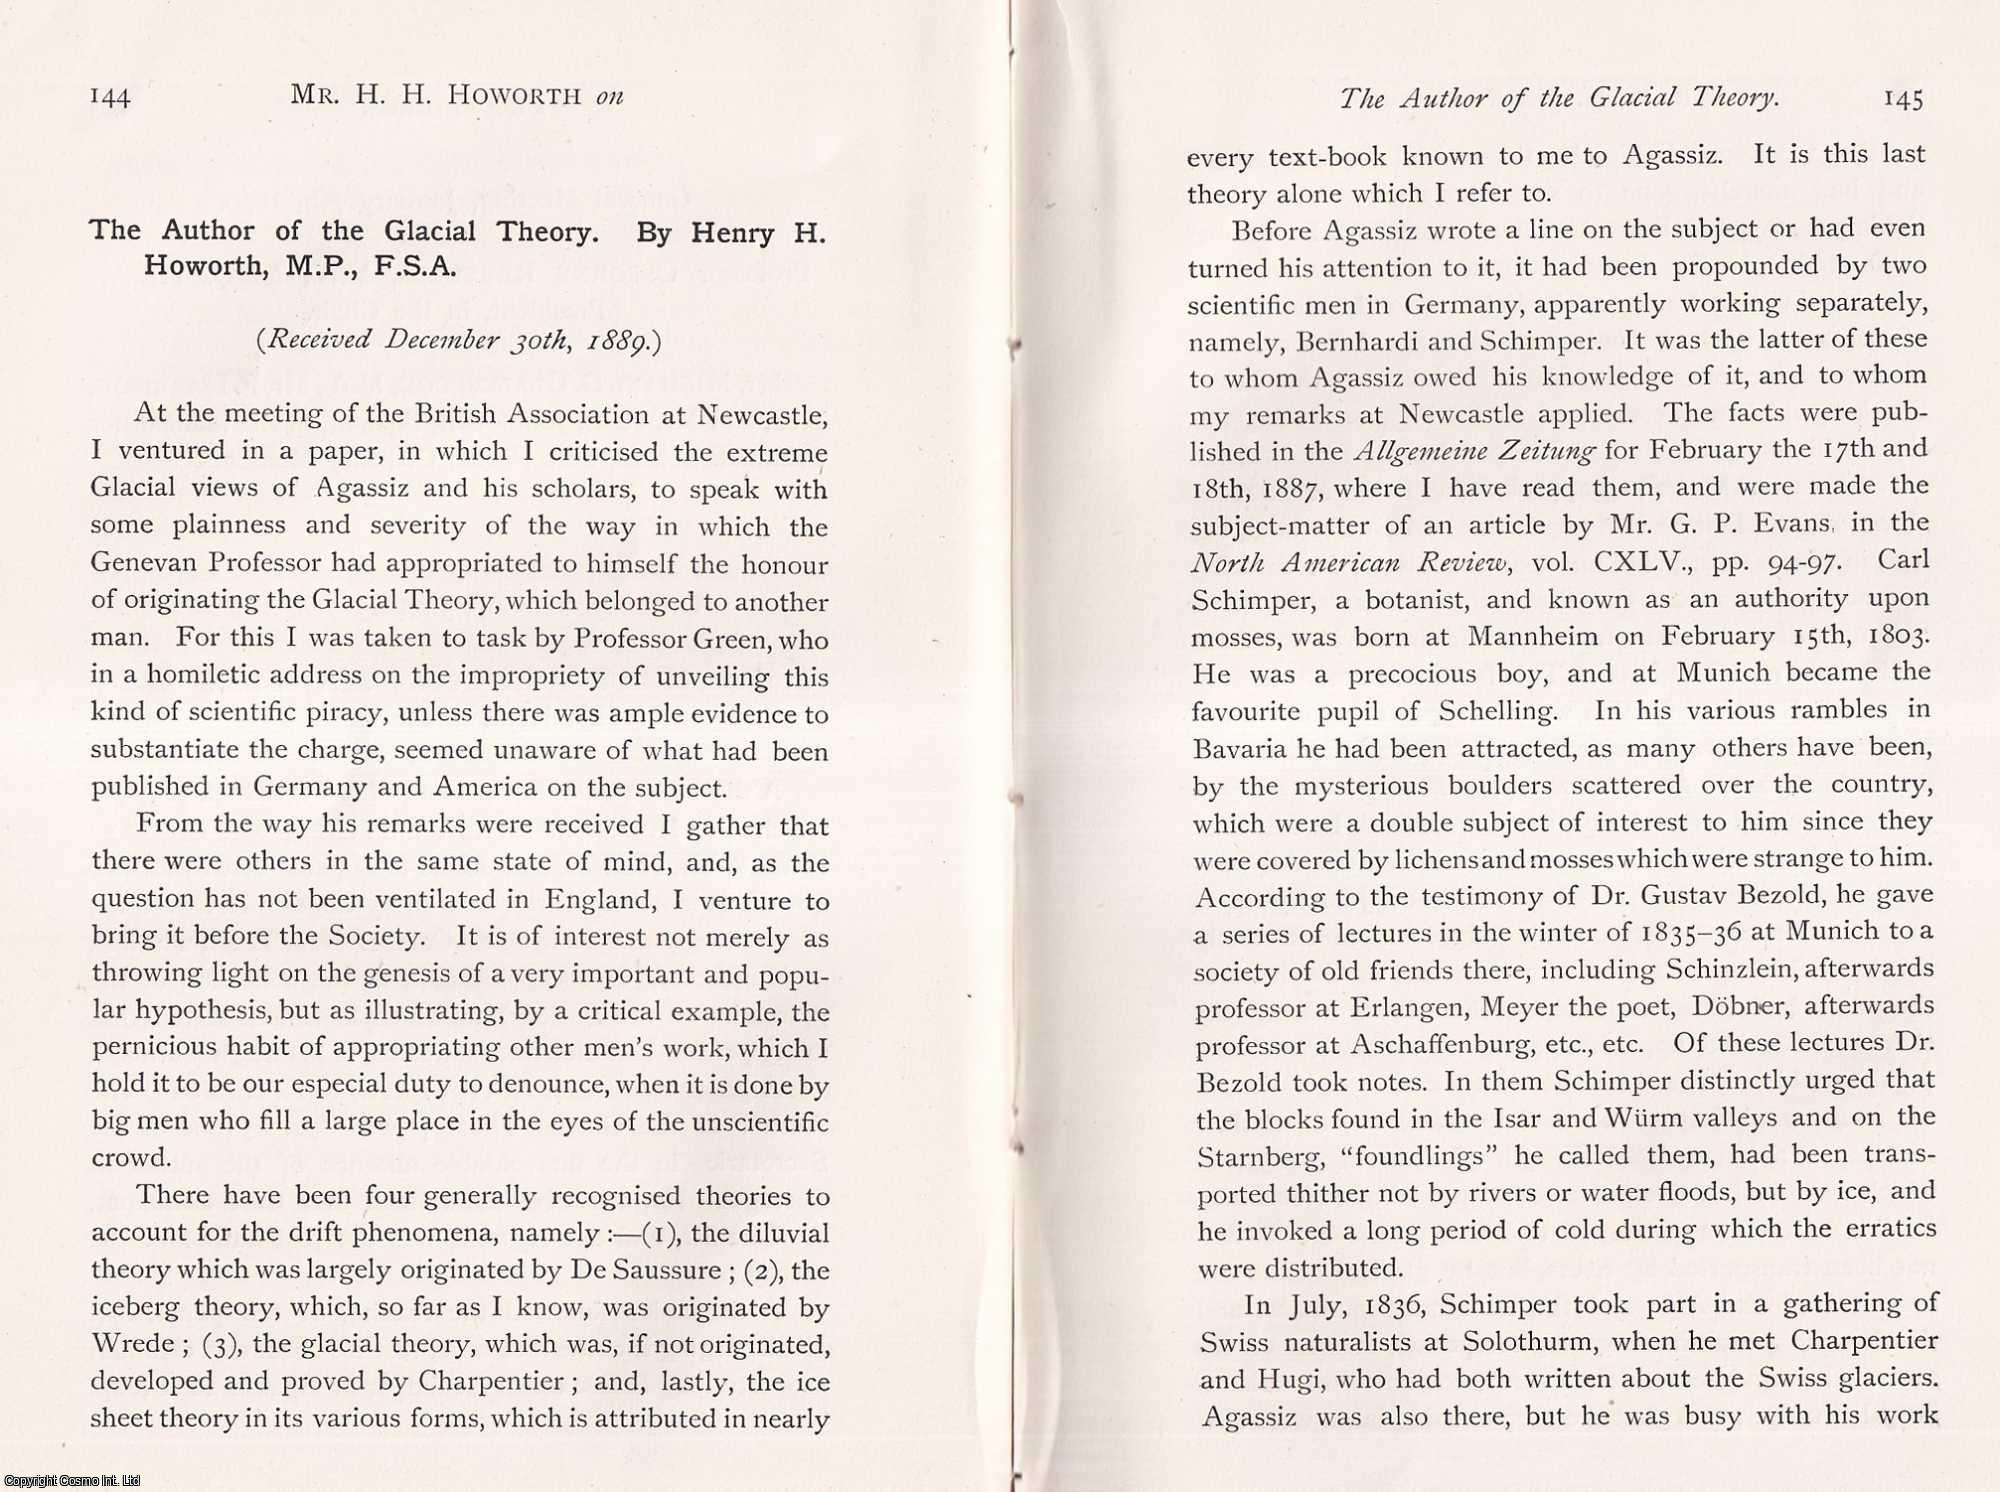 Henry H. Howorth - The Author of the Glacial Theory. This is an original article from the Memoirs of the Literary and Philosophical Society of Manchester, 1890.